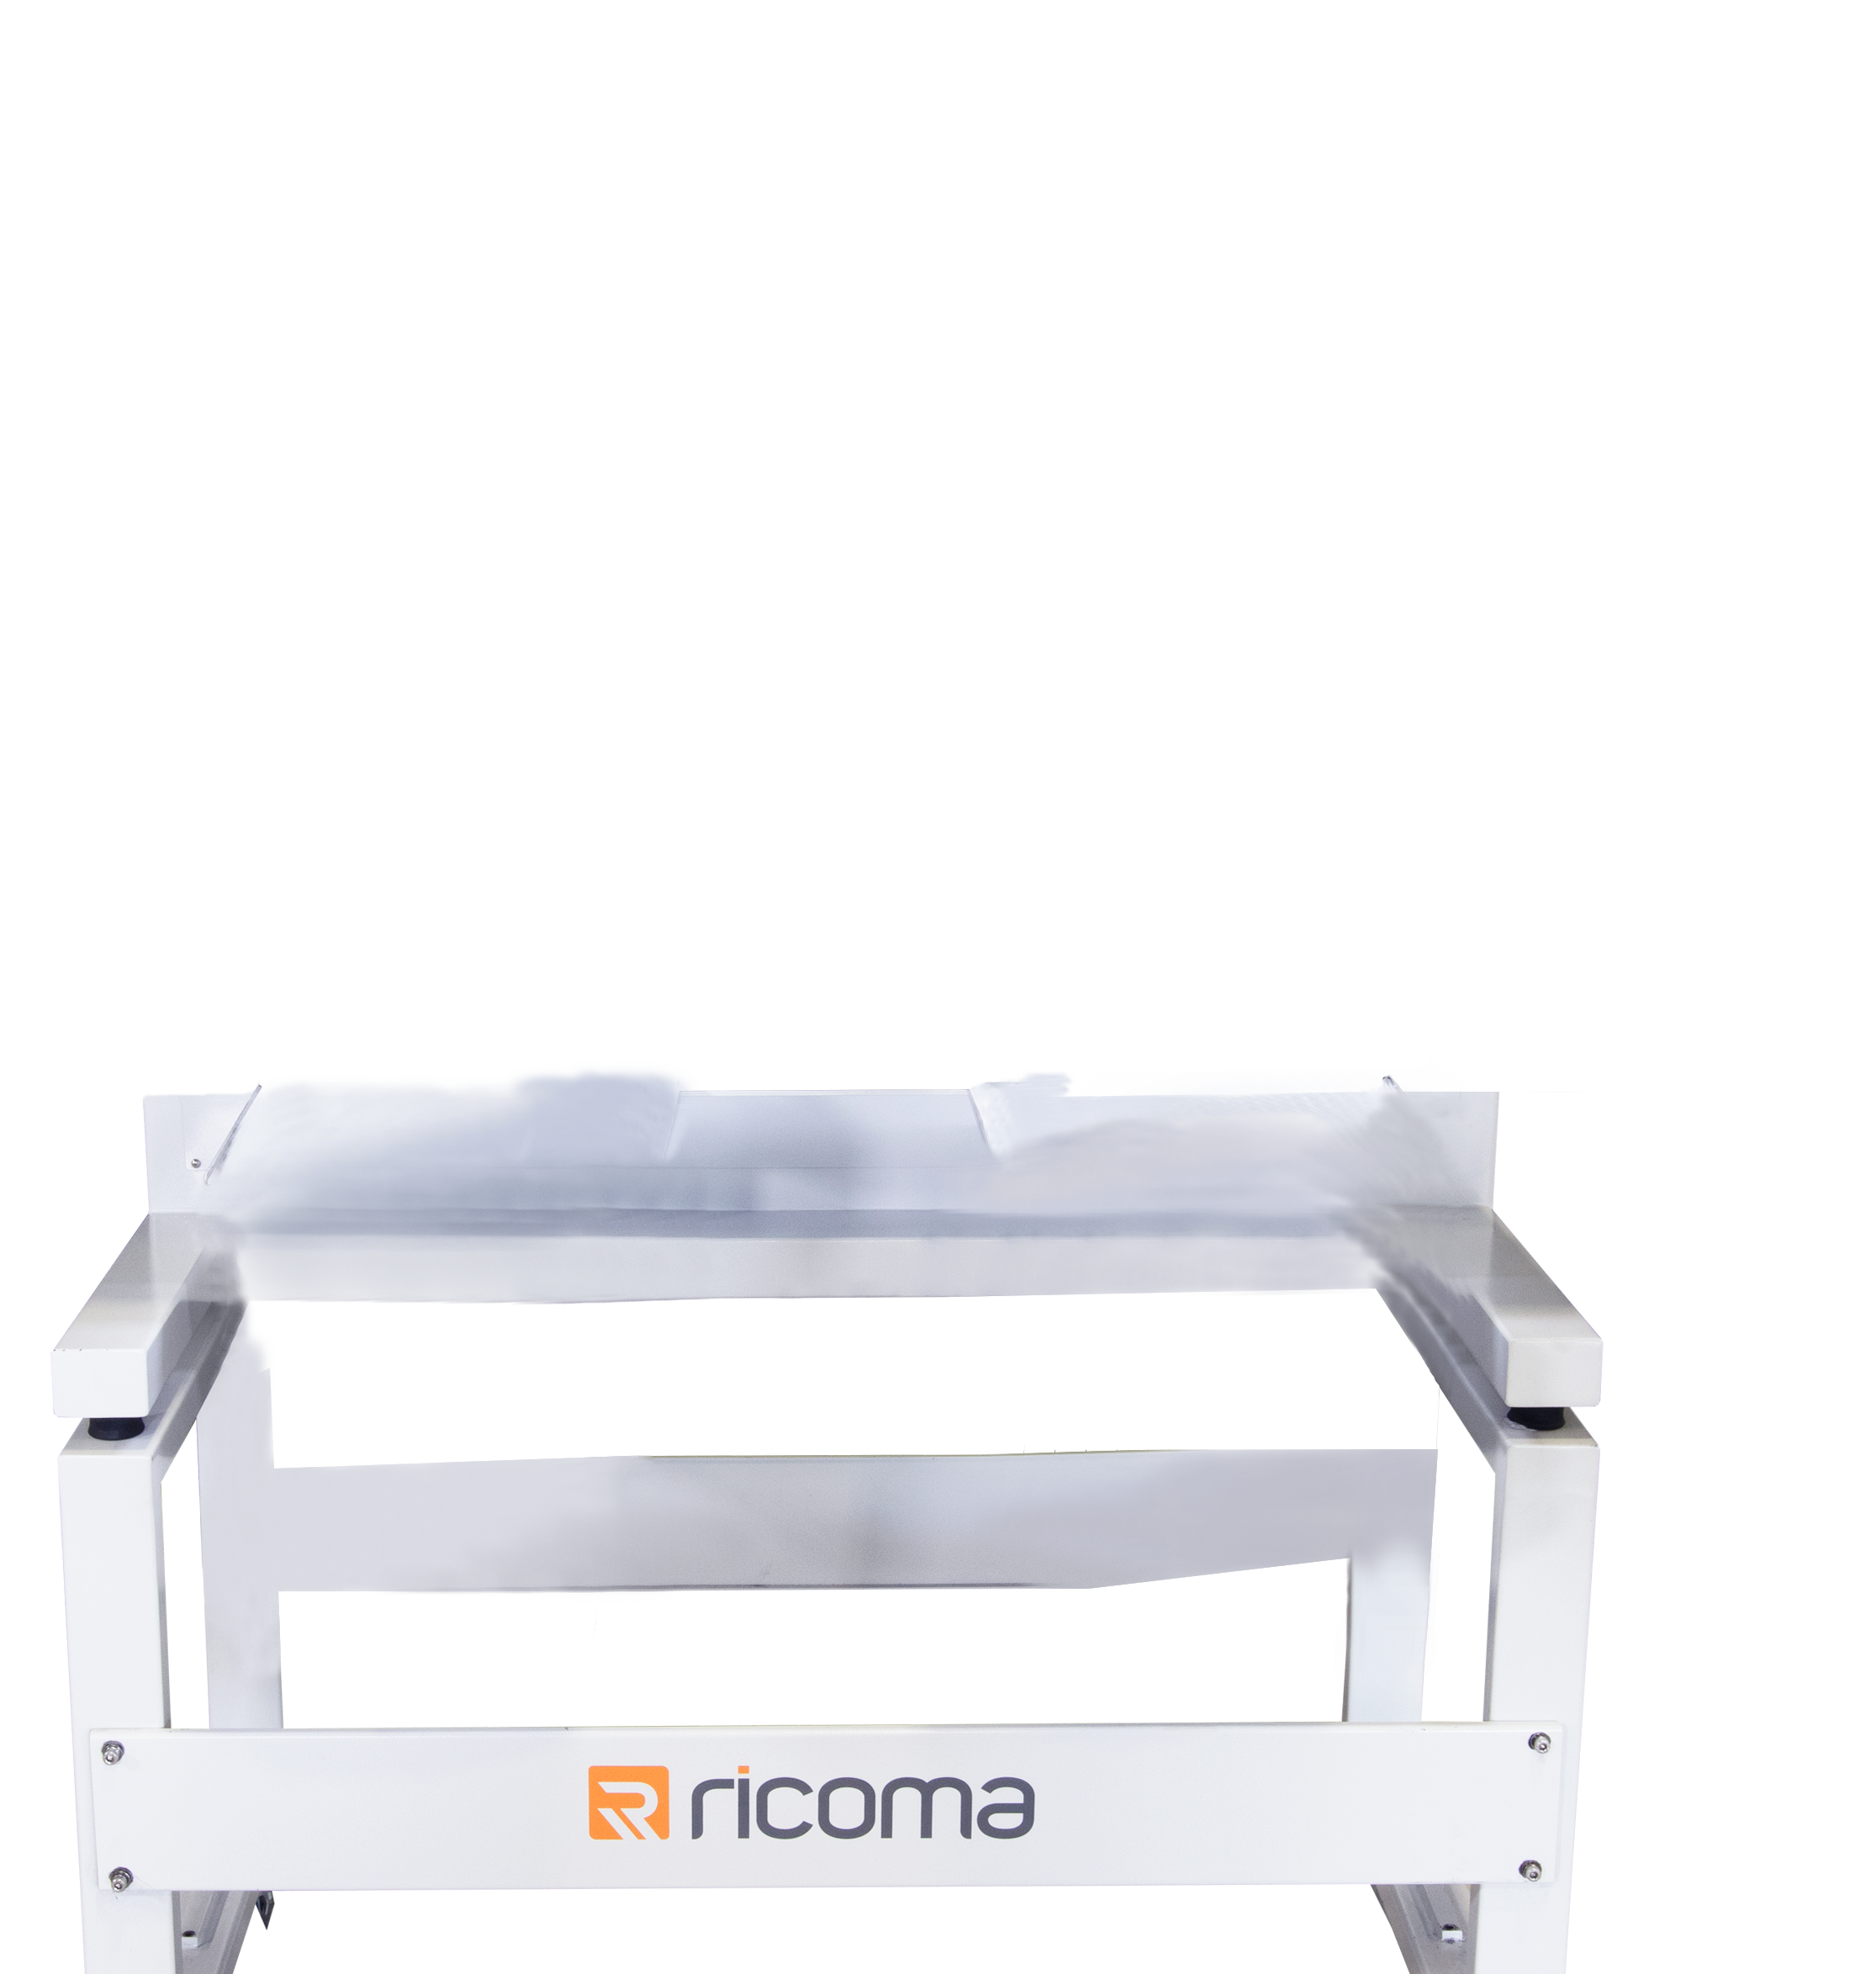 Ricoma MT 1502 Embroidery machine Used machines - Exapro